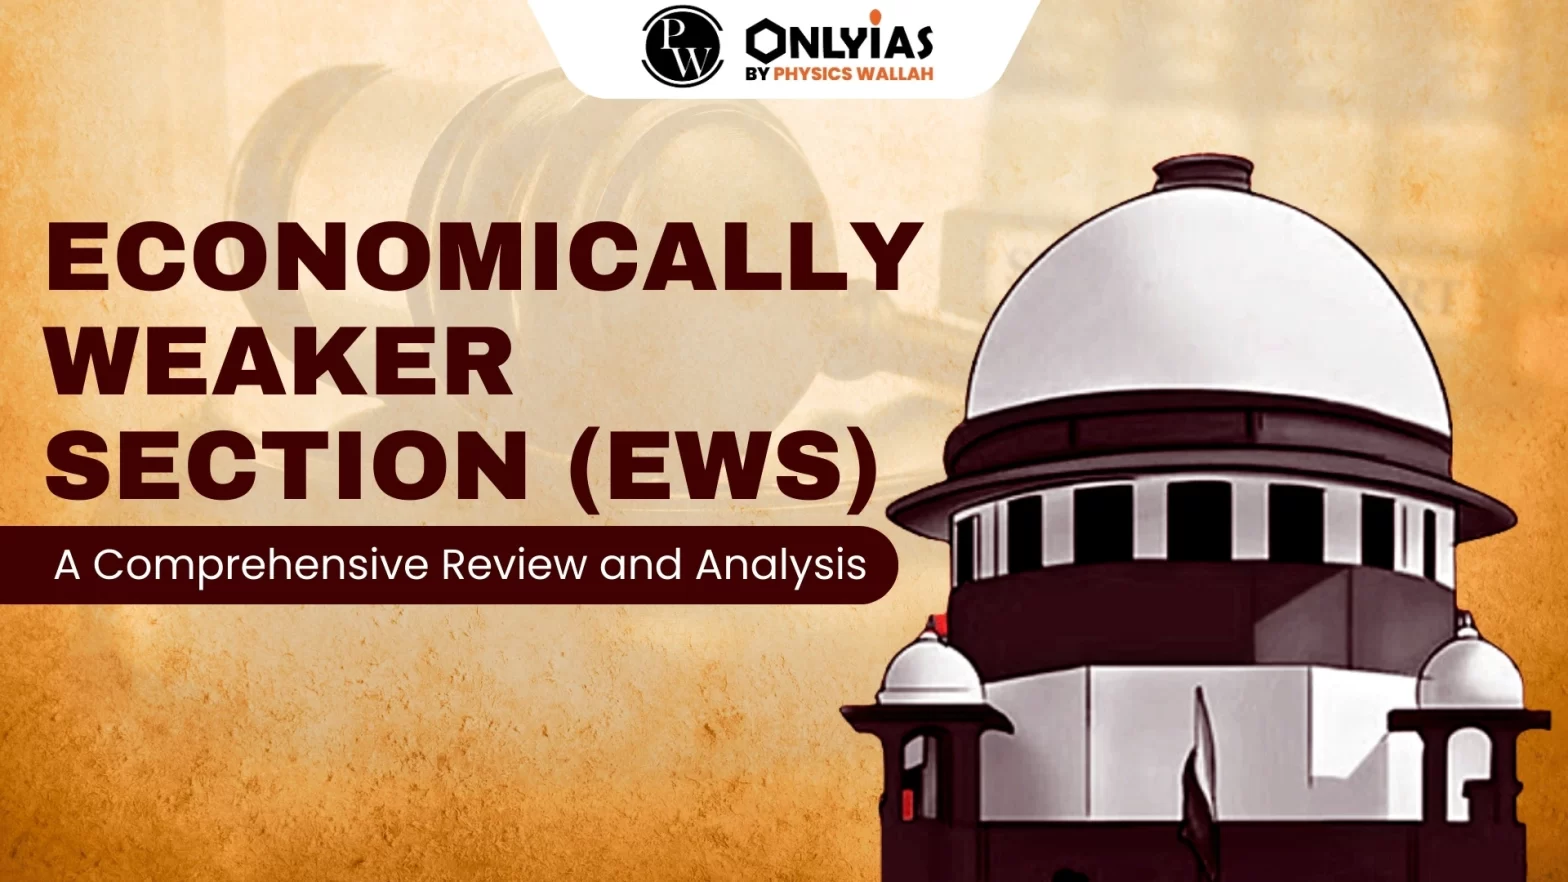 Economically Weaker Section (EWS): A Comprehensive Review and Analysis